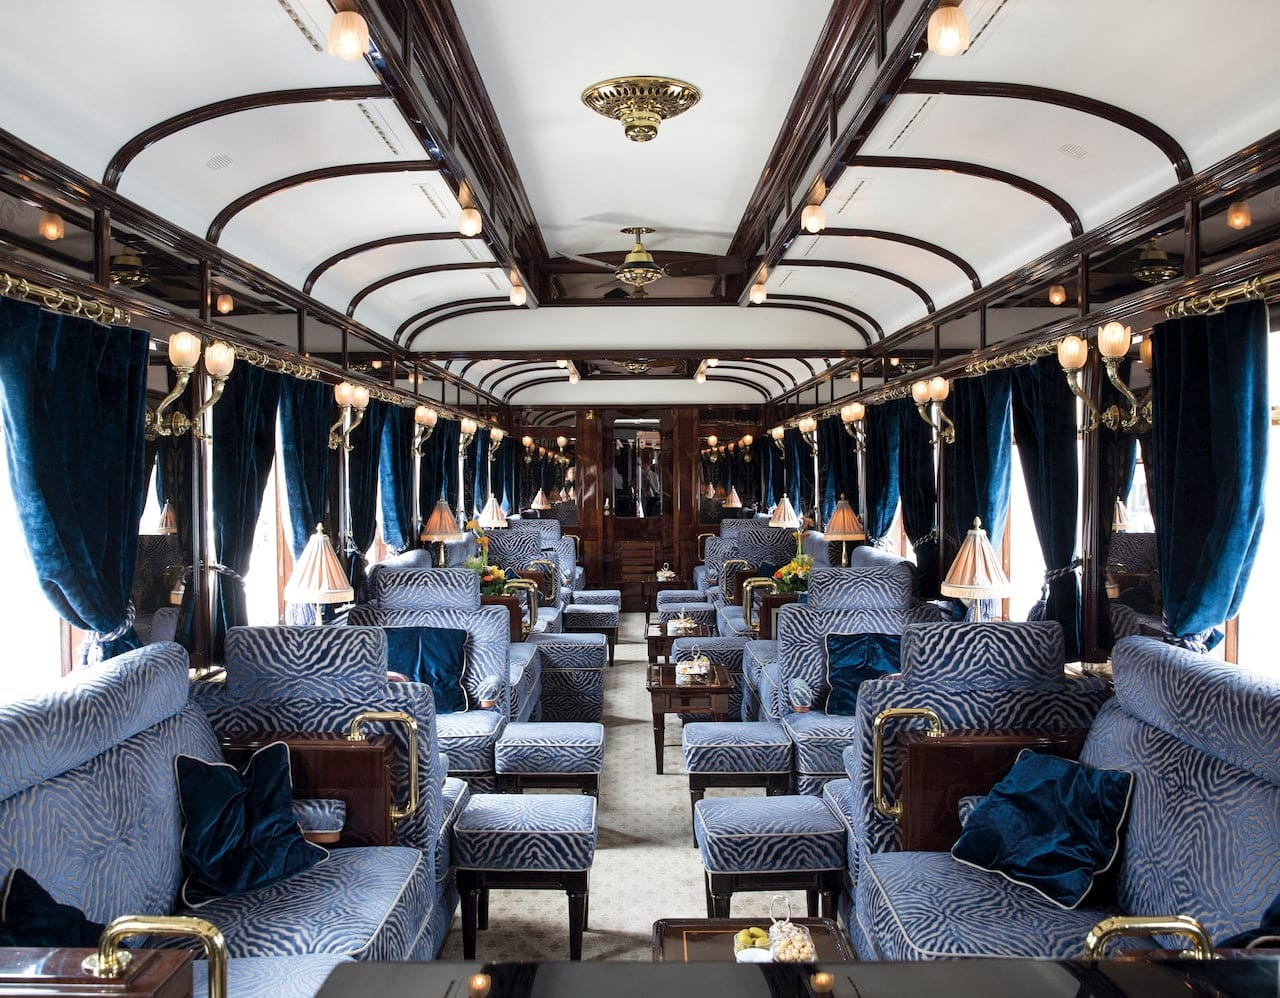 An interior view of the Venice Simplon-Orient-Express train; the luxurious lounge carriage is decorated with sumptuous deep blue soft furnishings.